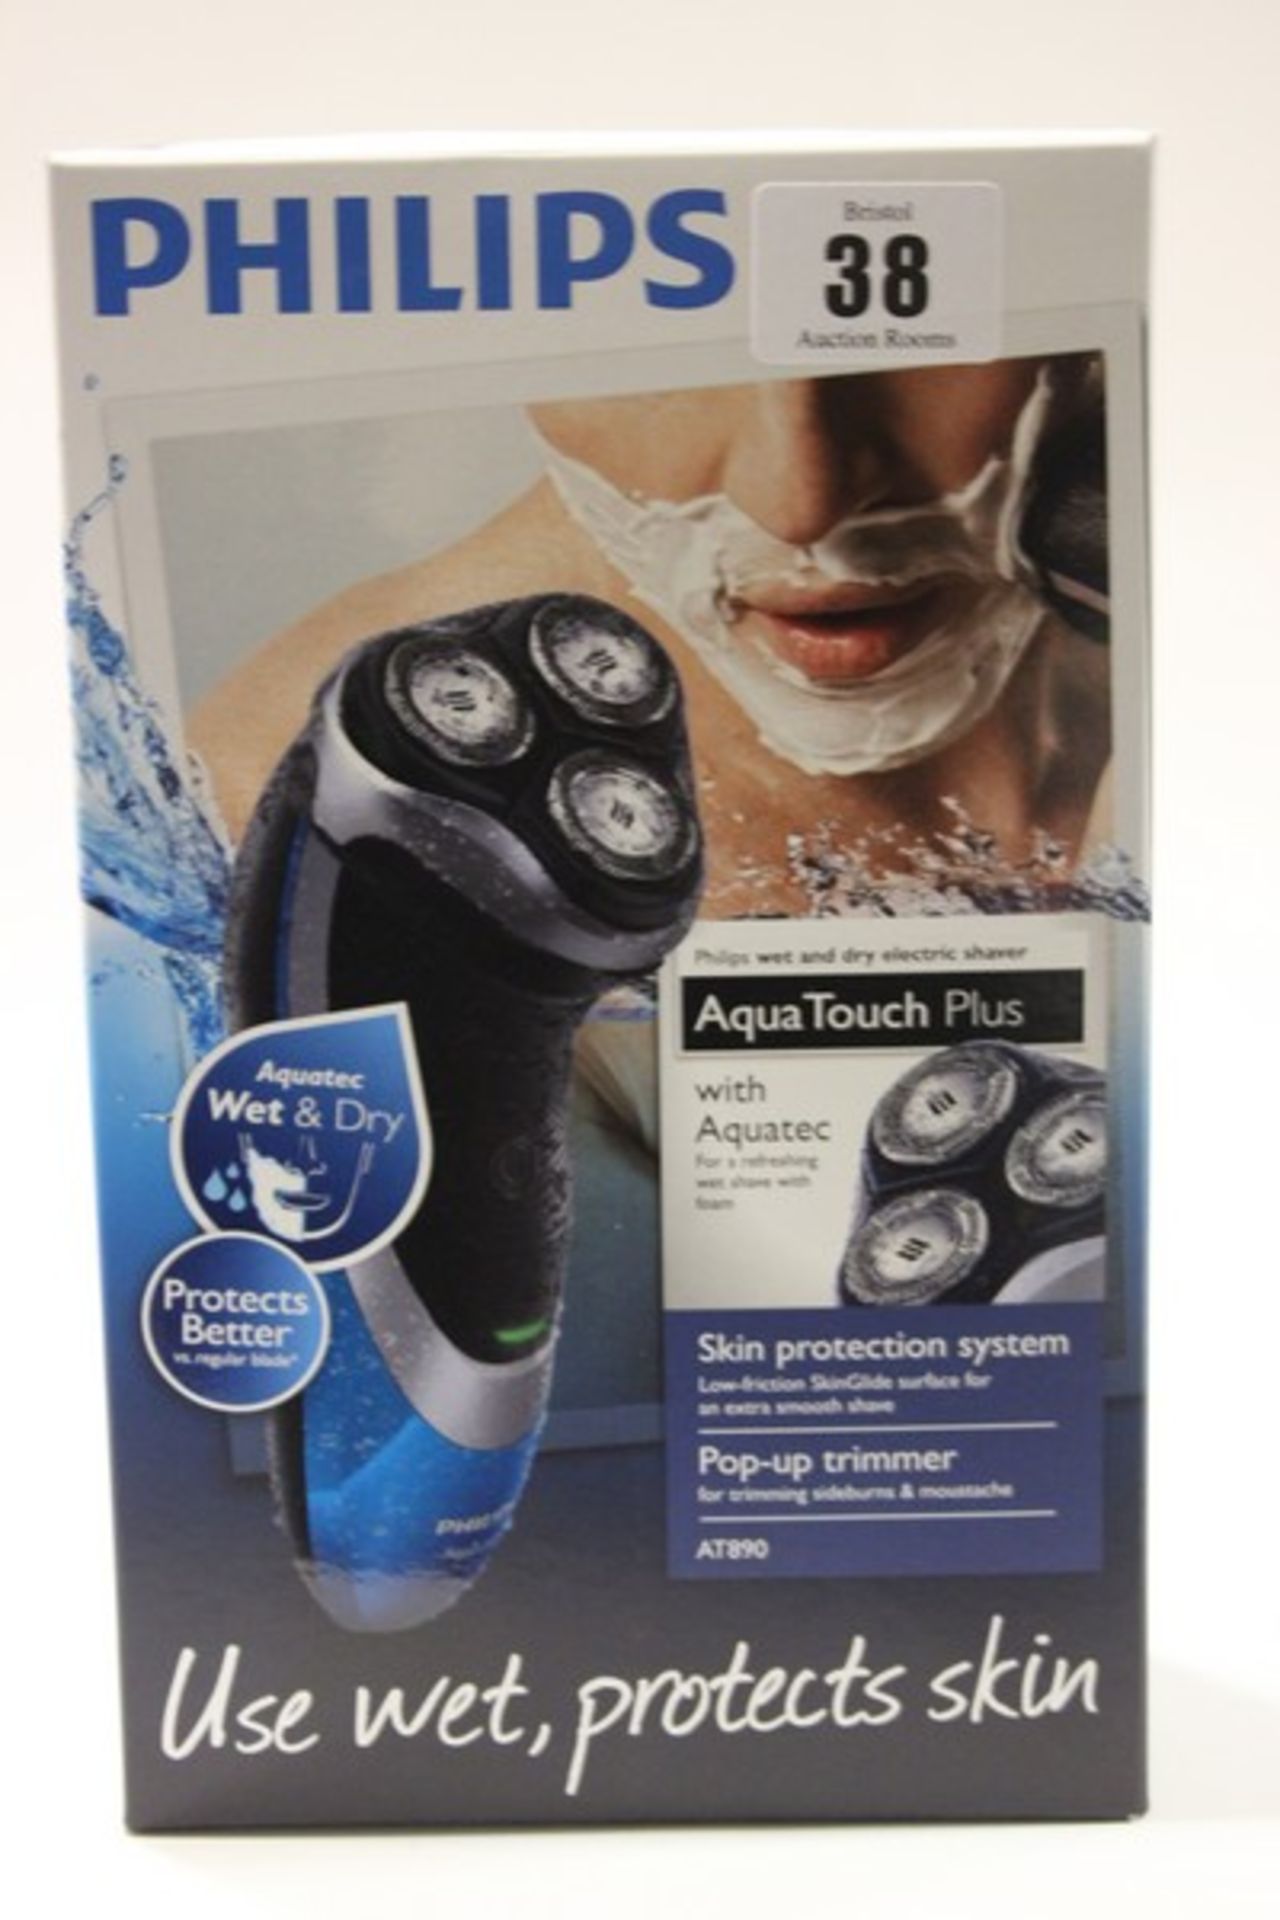 Two Philips Aqua Touch Plus AT890 wet and dry electric shavers (Boxed as new).